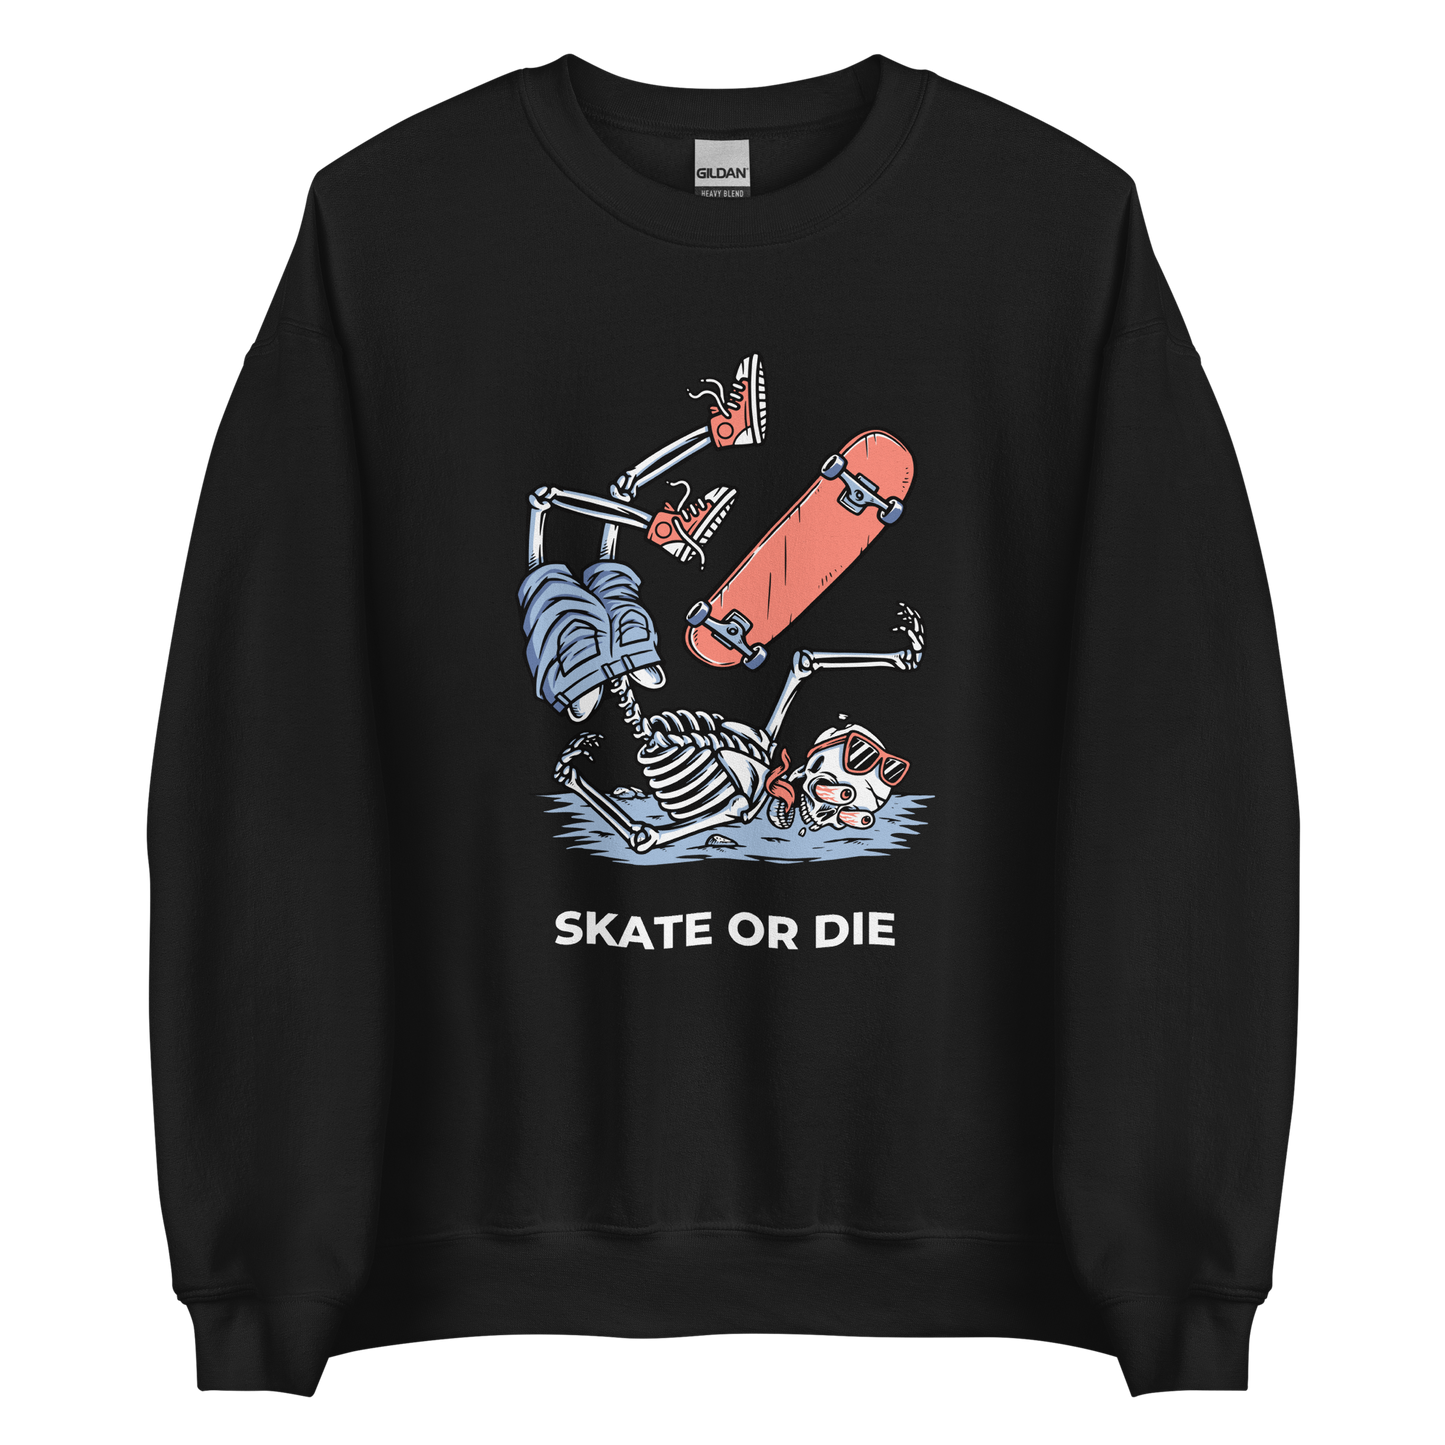 Black Skate or Die Sweatshirt featuring a daring Skeleton Falling While Skateboarding graphic on the chest - Cool Graphic Skeleton Sweatshirts - Boozy Fox